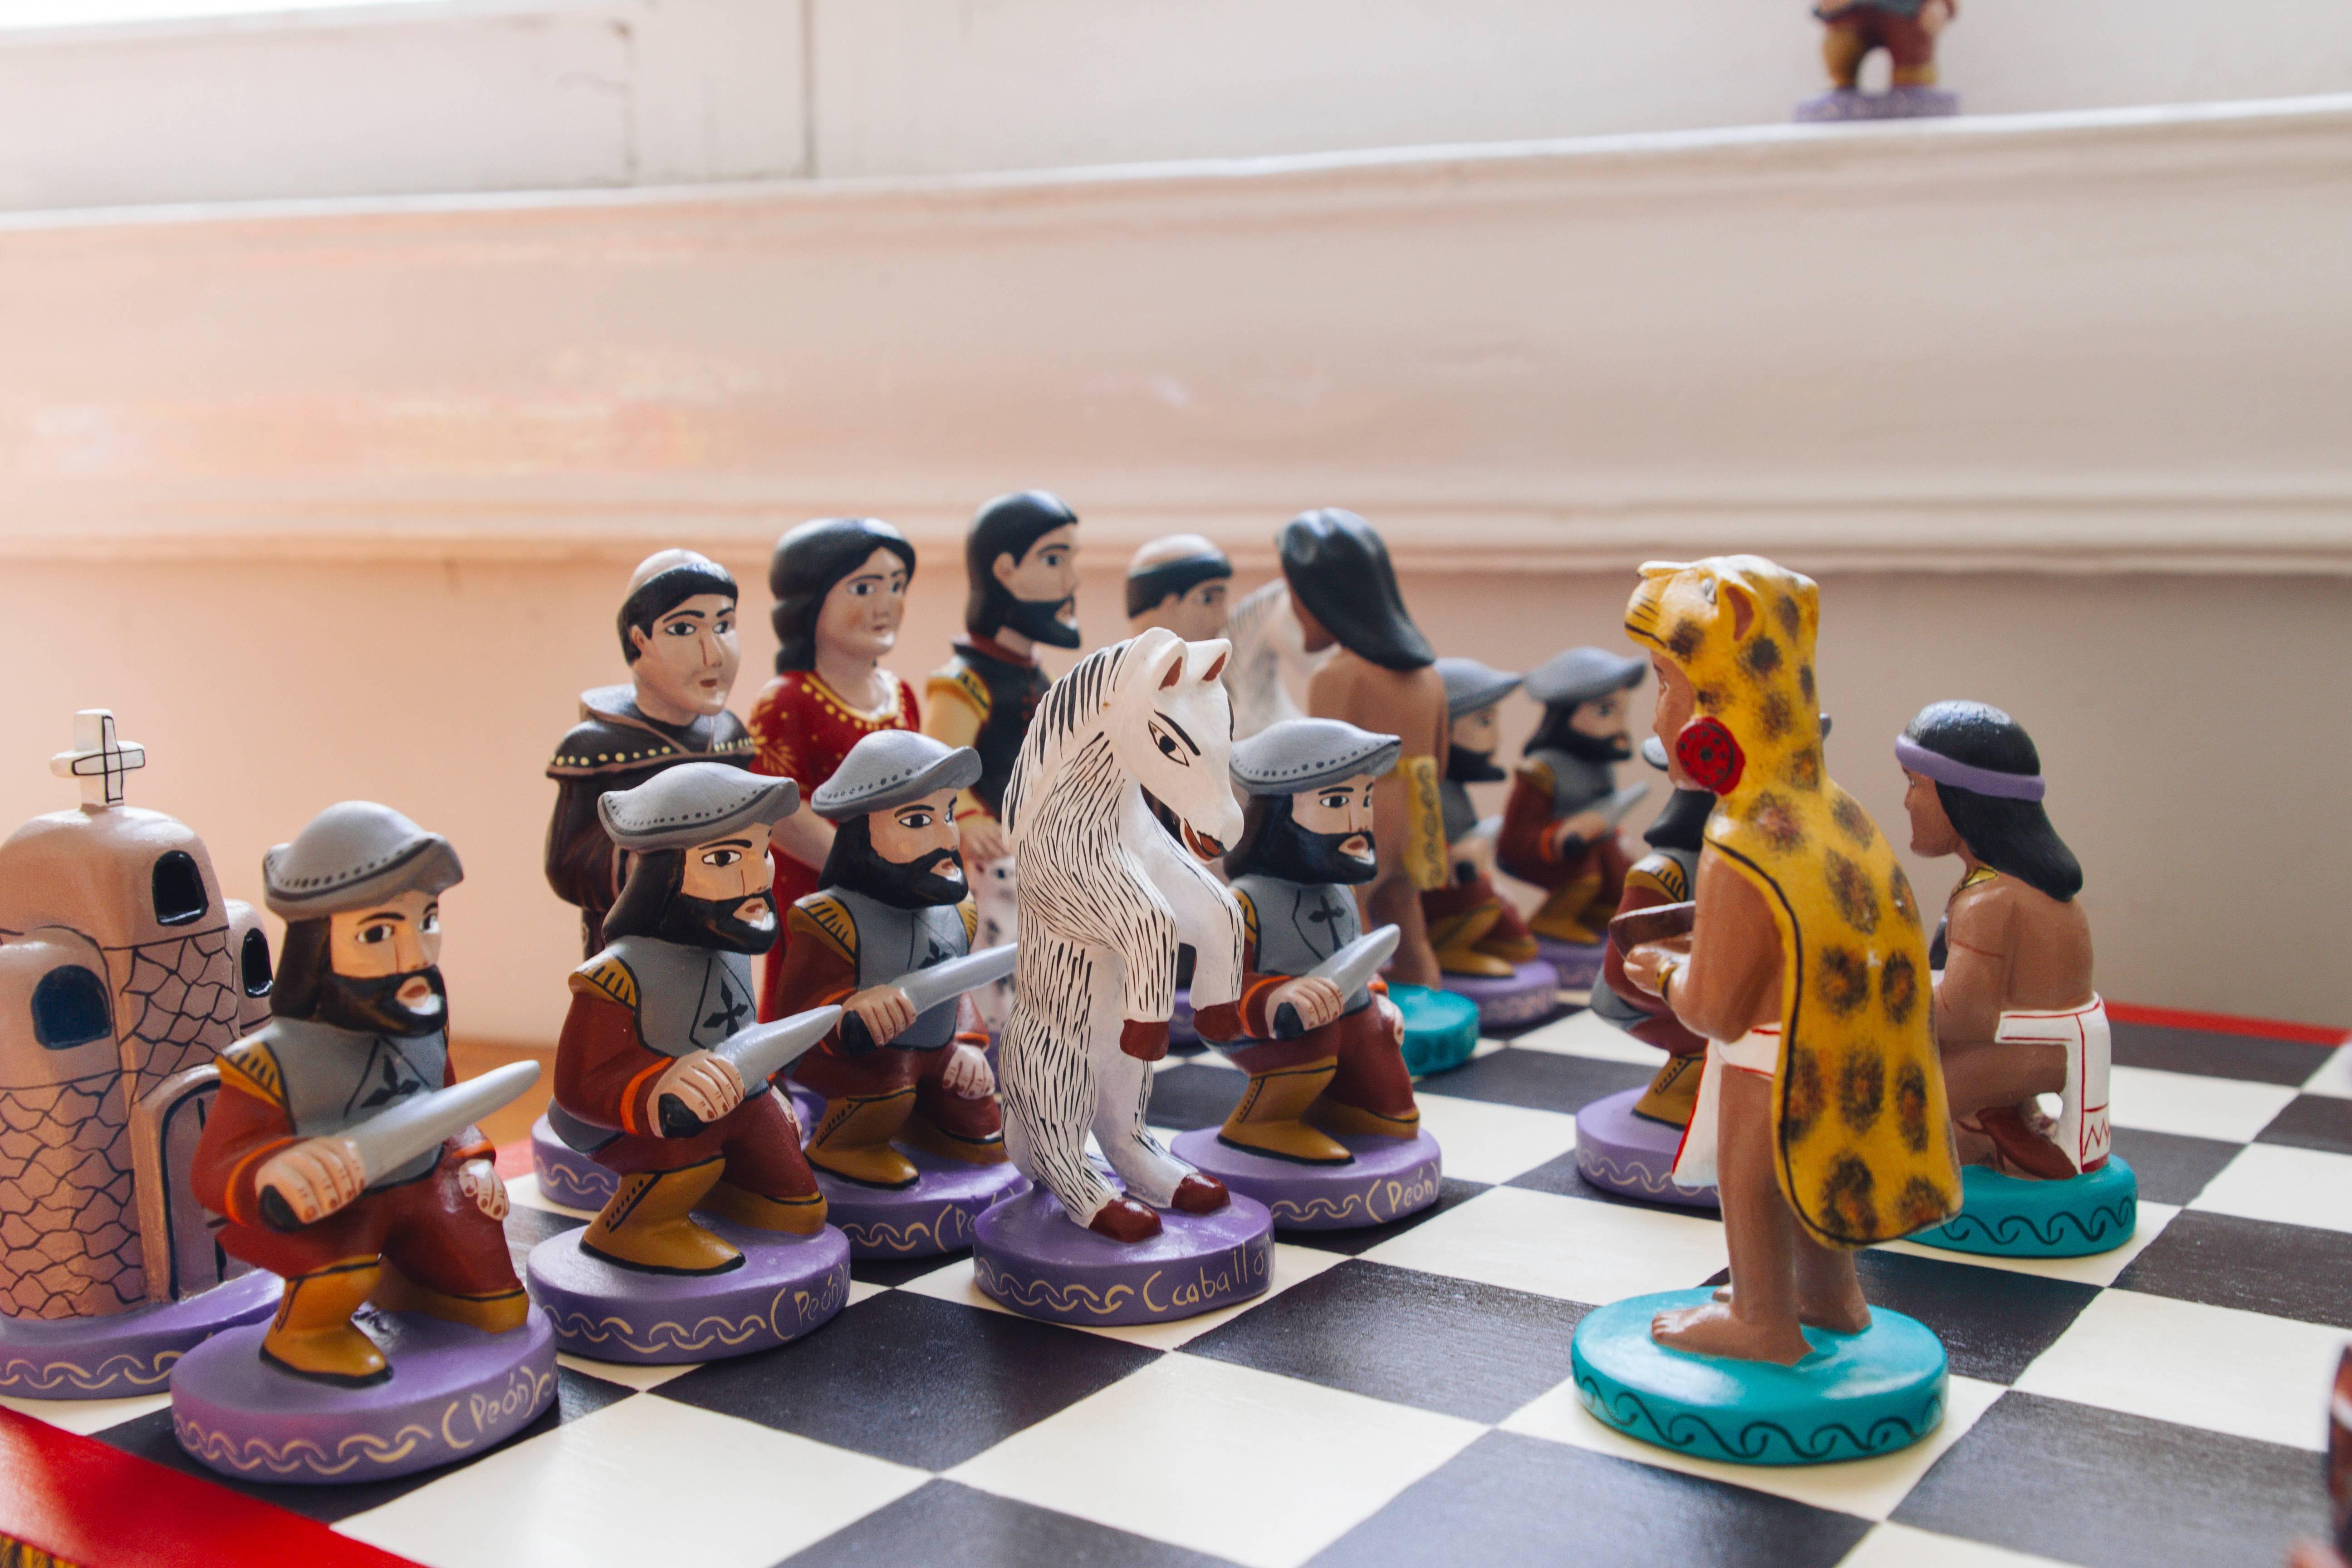 Chess Set Wood Carving Folkloric Alebrije Spaniards and Indigenous Mixes 1